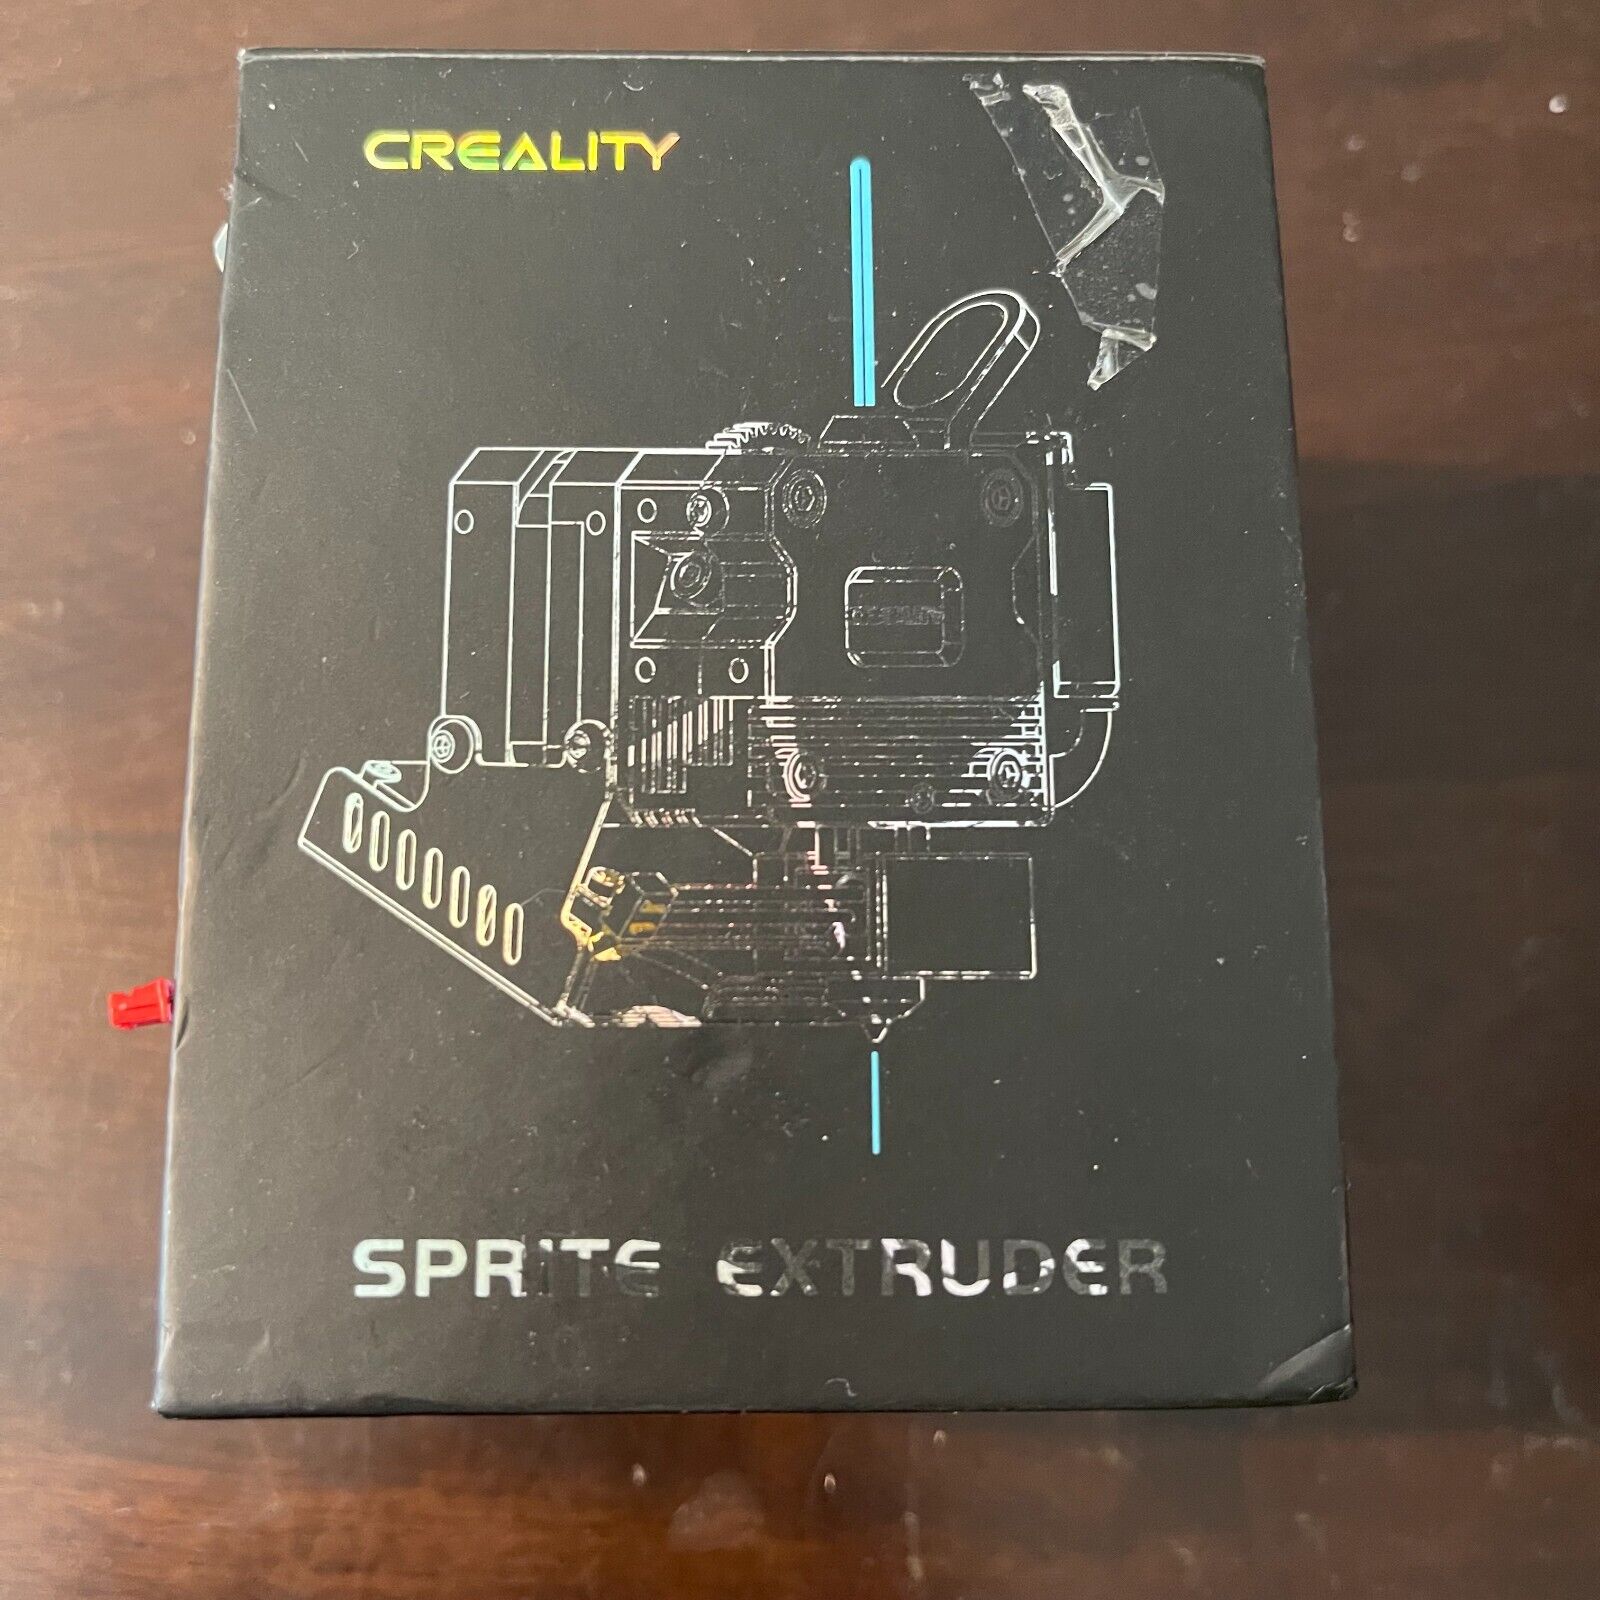 New~Creality Sprite Extruder Pro for Ender-3 S1/ S1 Pro/ S1 Plus/CR-10 Smart Pro